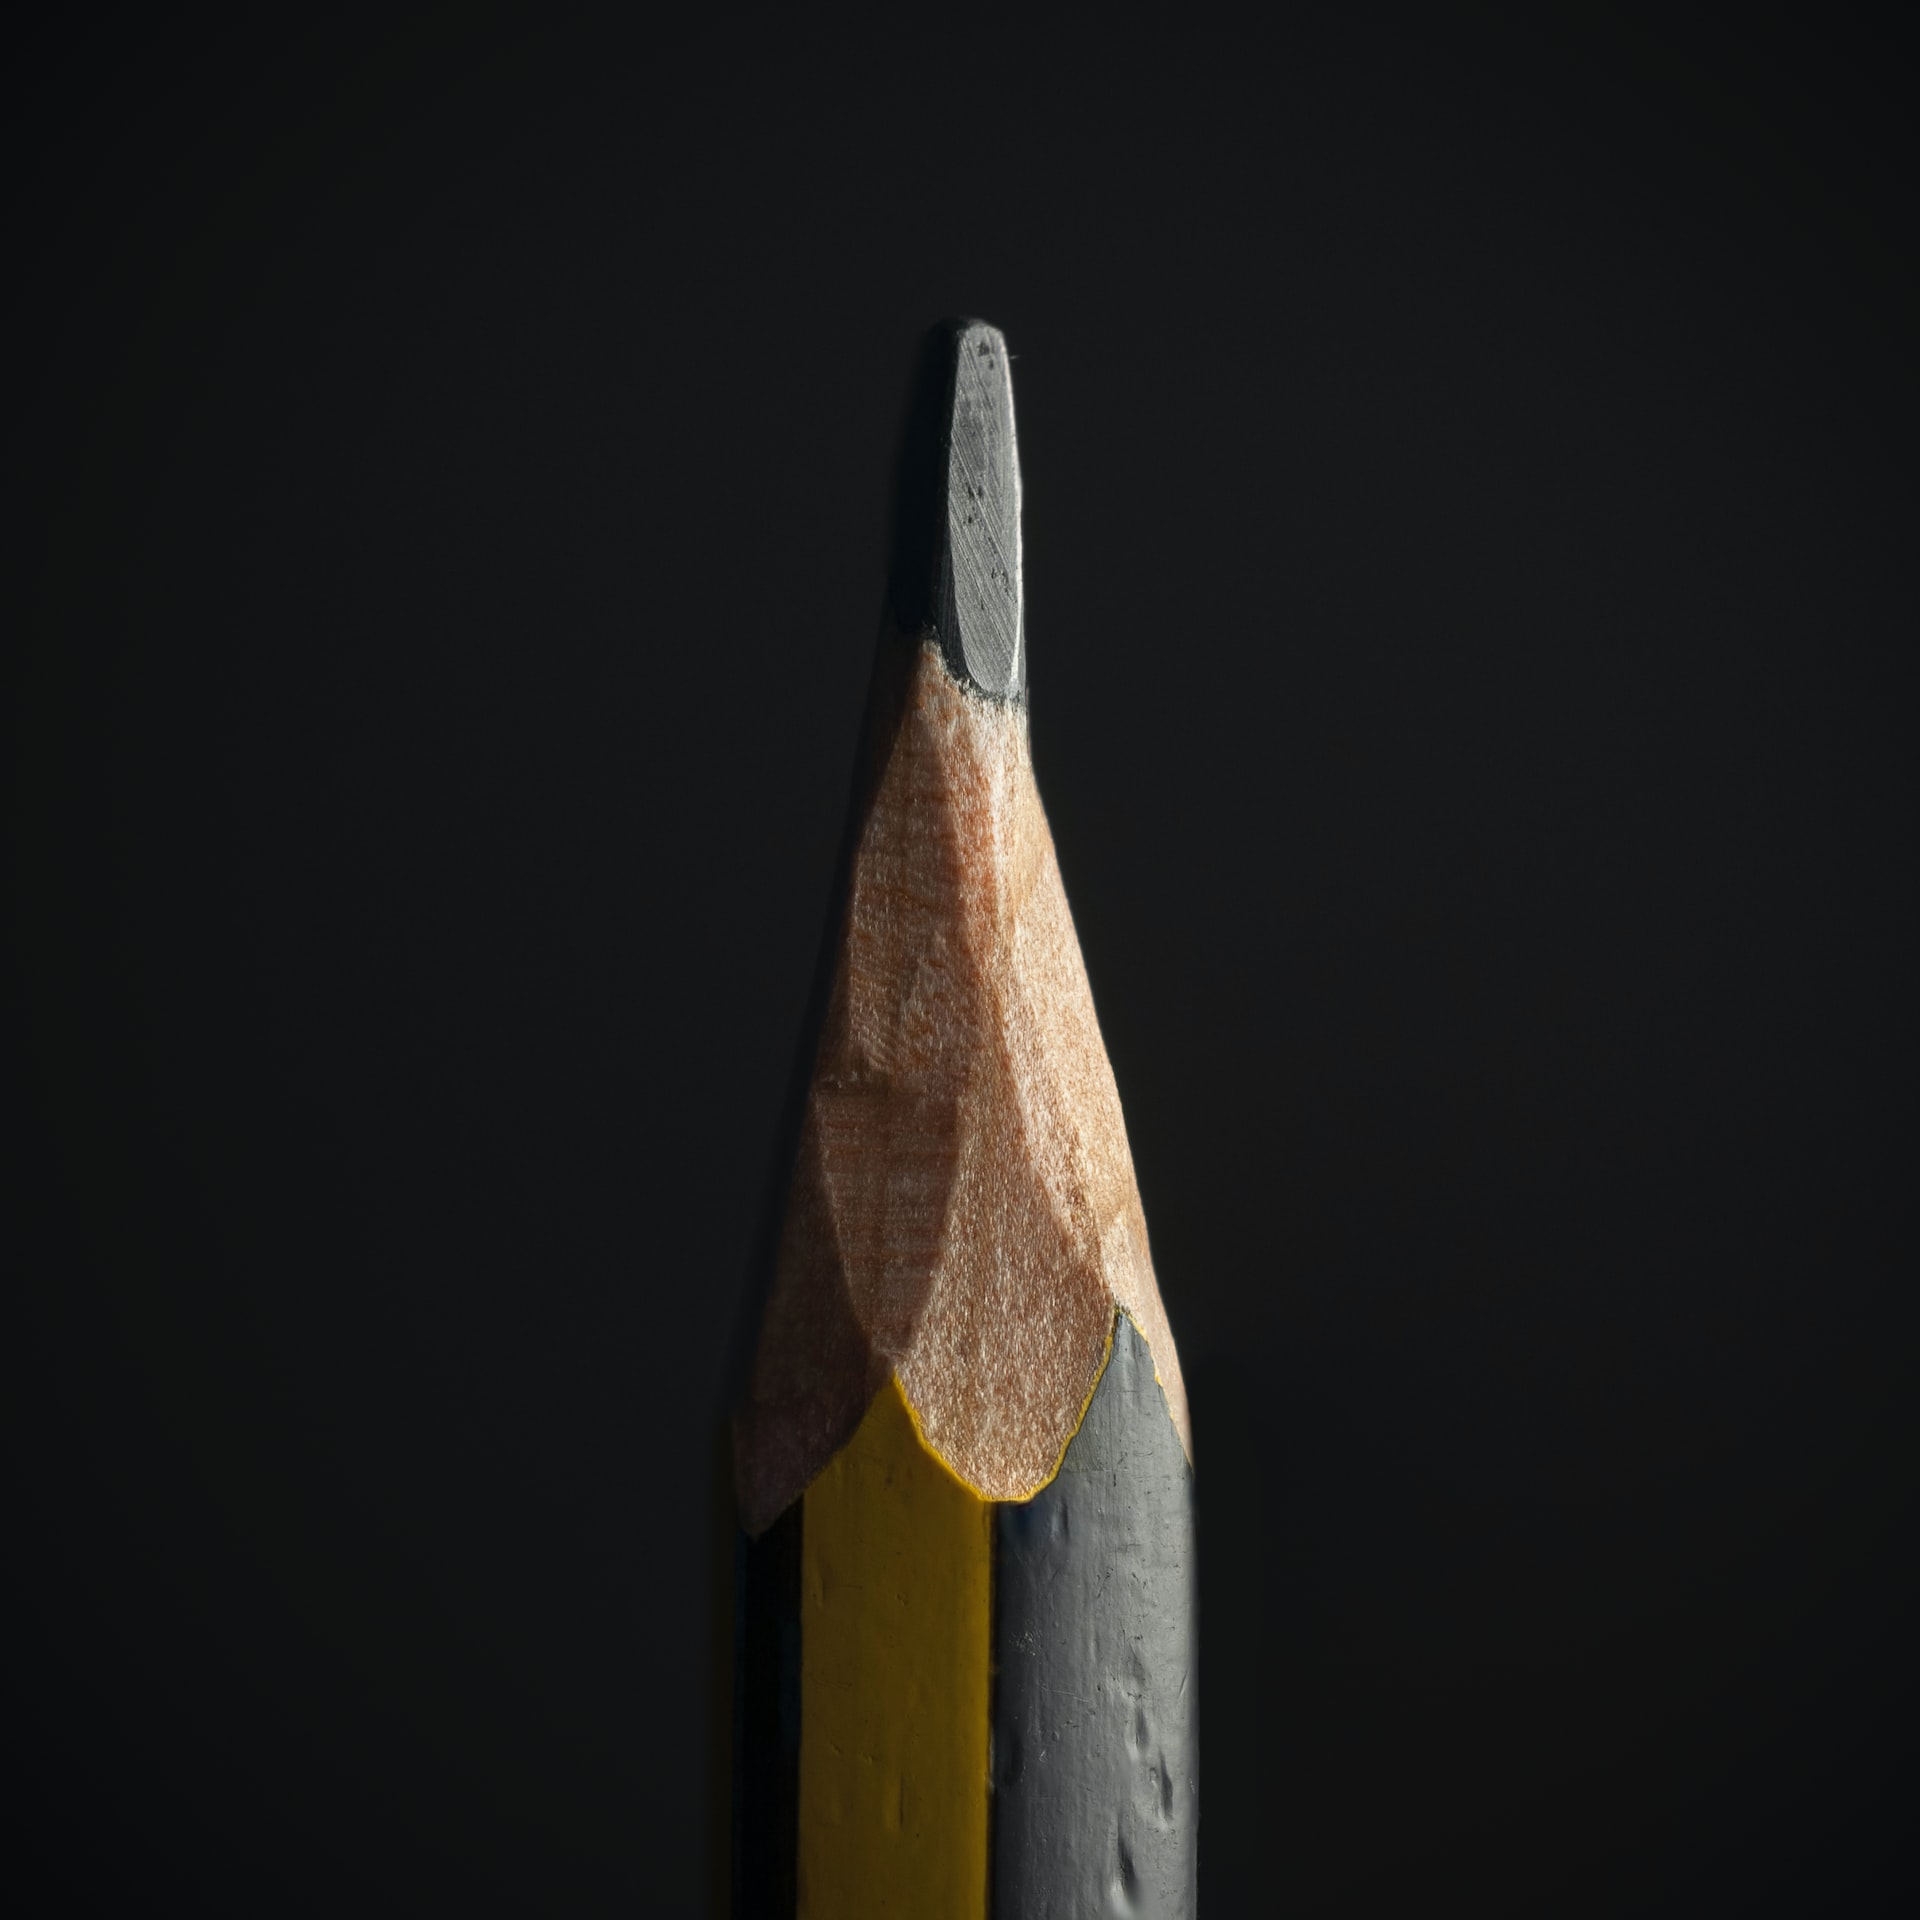 A close up picture of the tip of a sharpened pencil on a dark background